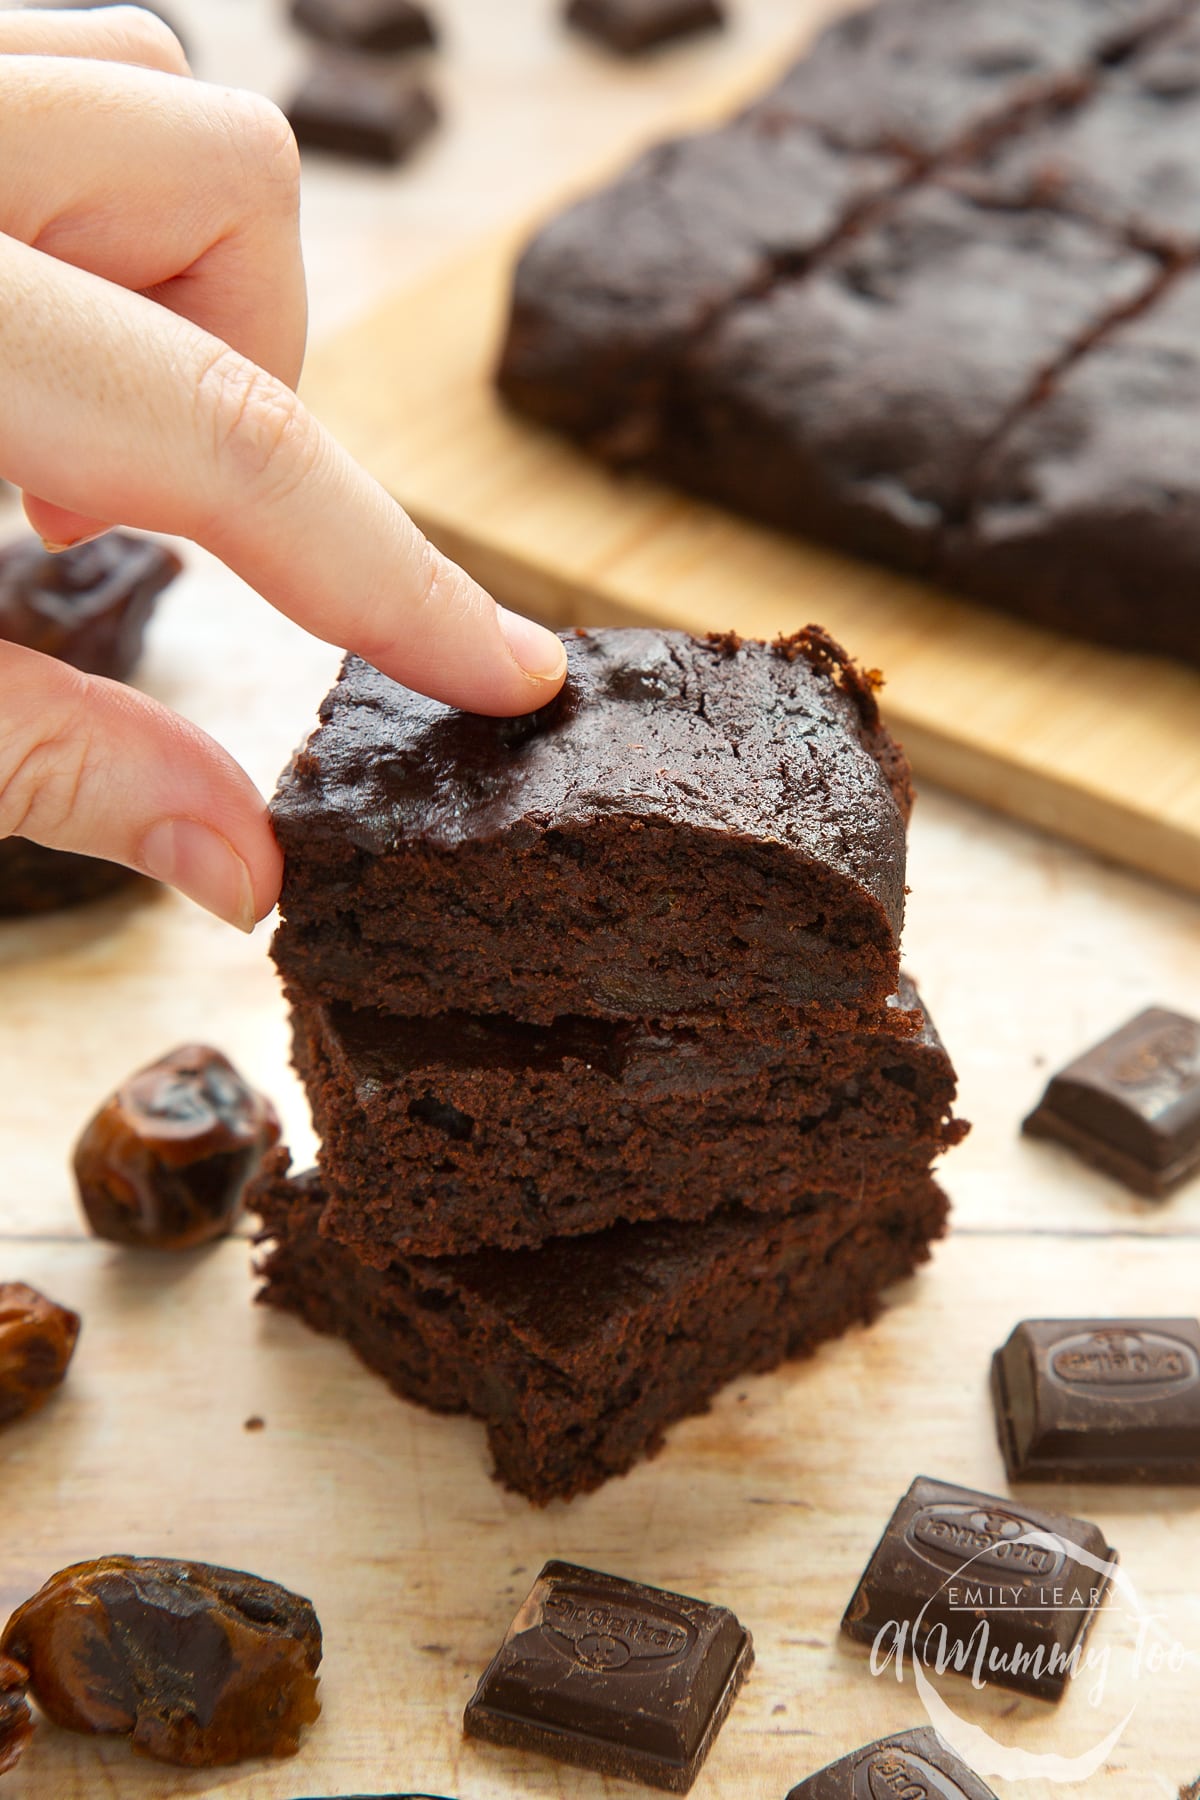 Whole grain brownies made with dates and dark chocolate, stacked up on pale wood. A hand reaches to take one.